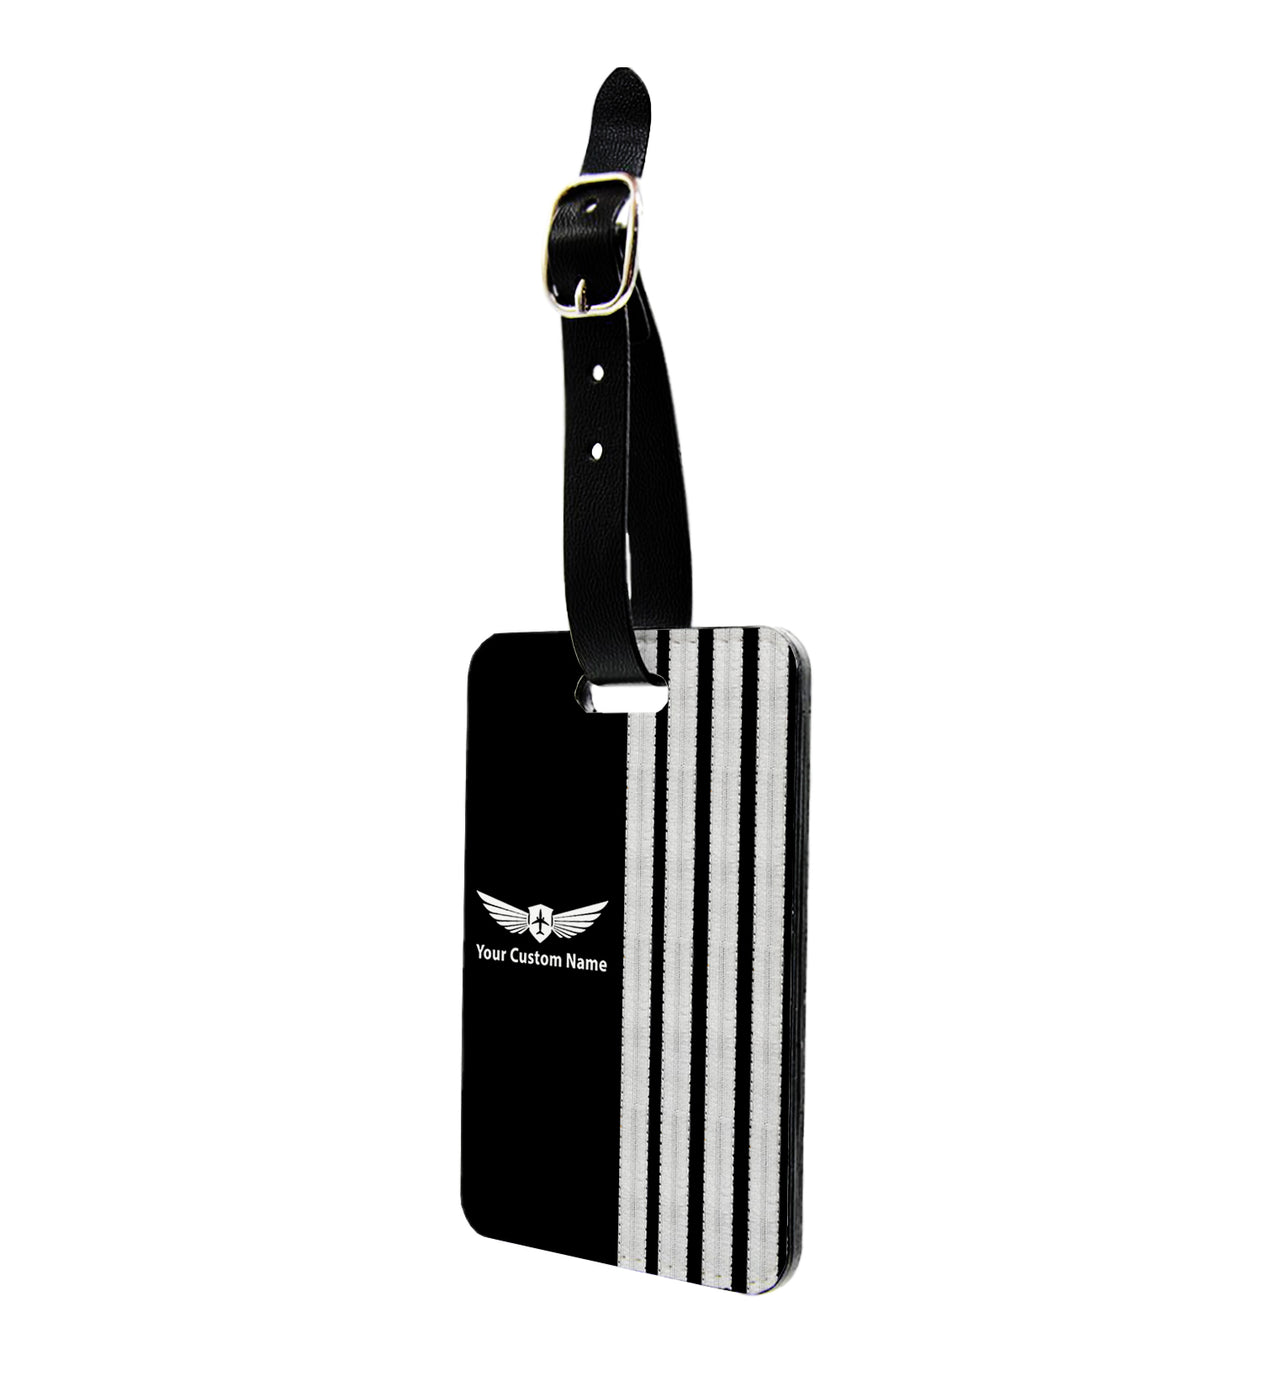 Customizable Name & Badge & Silver Special Pilot Epaulettes (4,3,2 Lines) Designed Luggage Tag